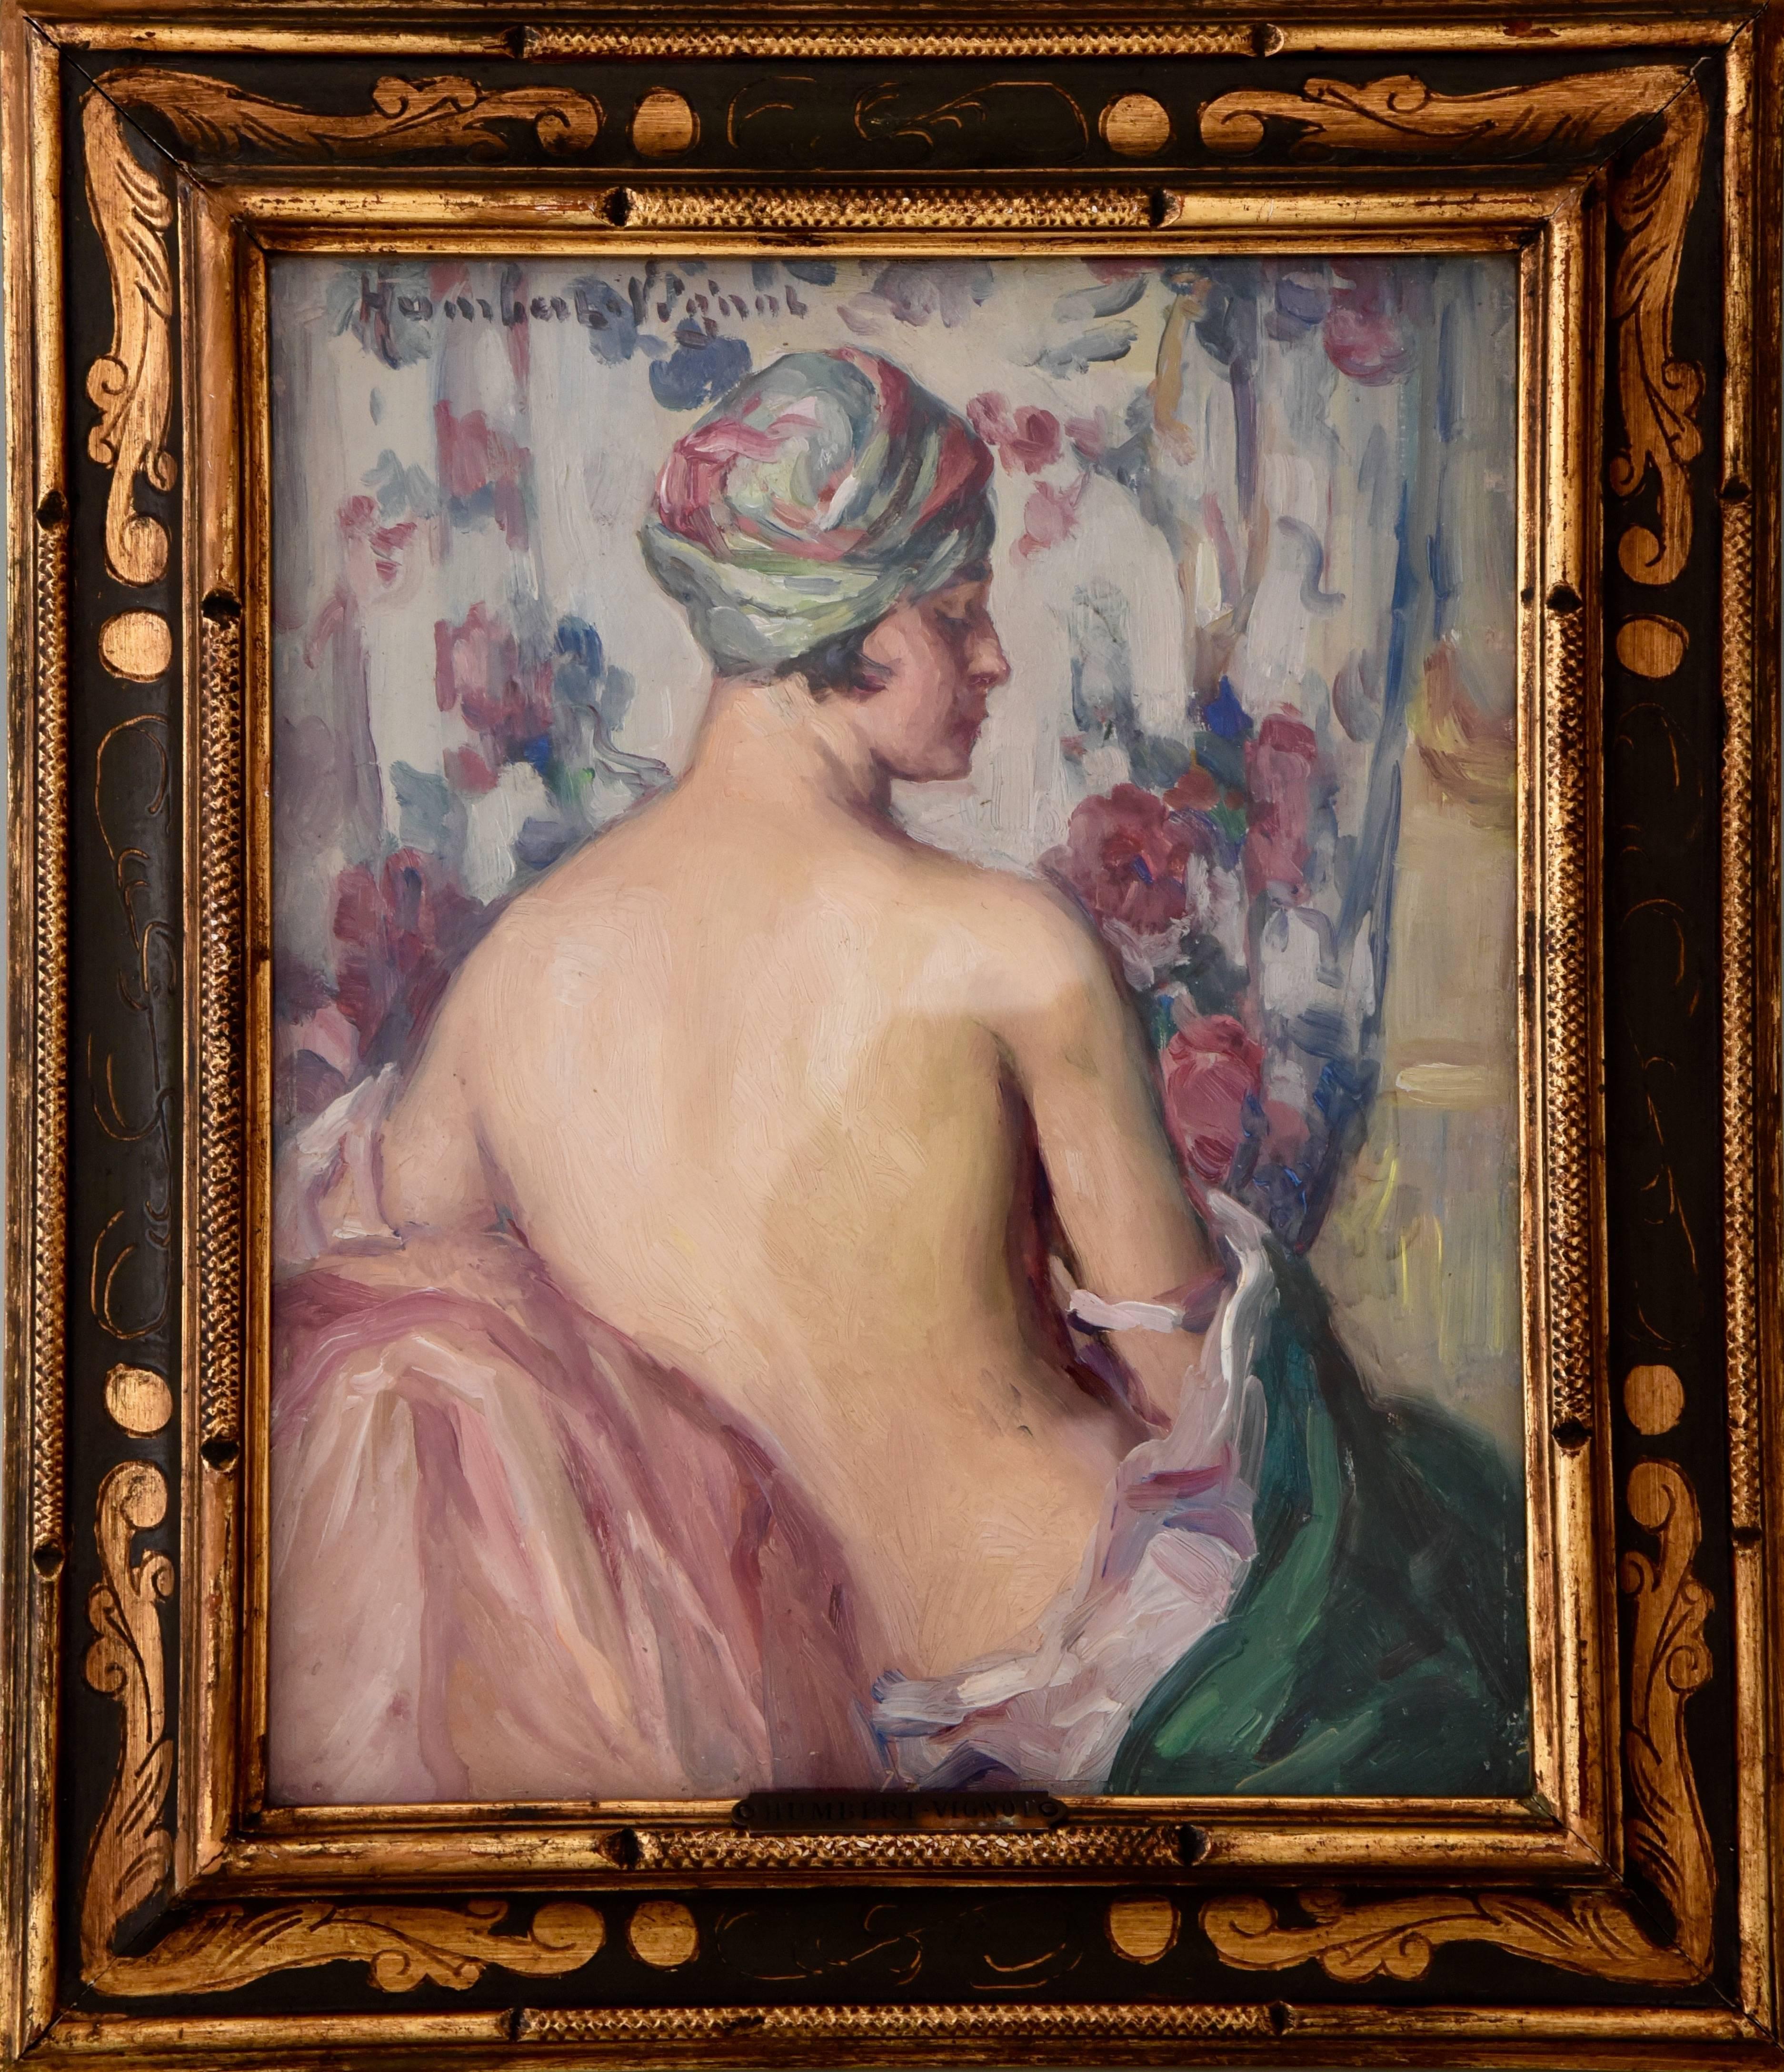 Oil painting of a nude with turban by Léonie Humbert Vignot. (Lyon 1878-1960)She studied at the Ecole de Beaux Arts in Lyon and exhibited her work in Paris at the Salons des Artistes. Works in the Museum of Digne les Bains, France.
The young woman